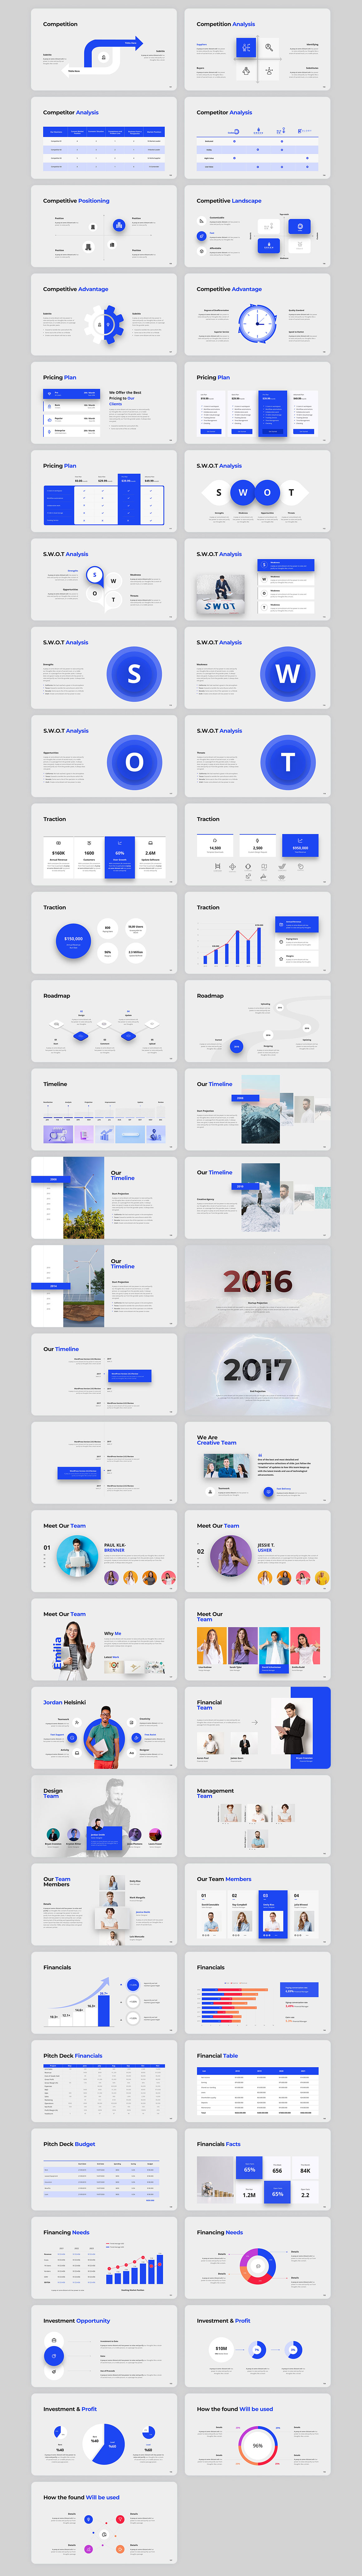 Startup Perfect Pitch Deck Powerpoint Template - 12